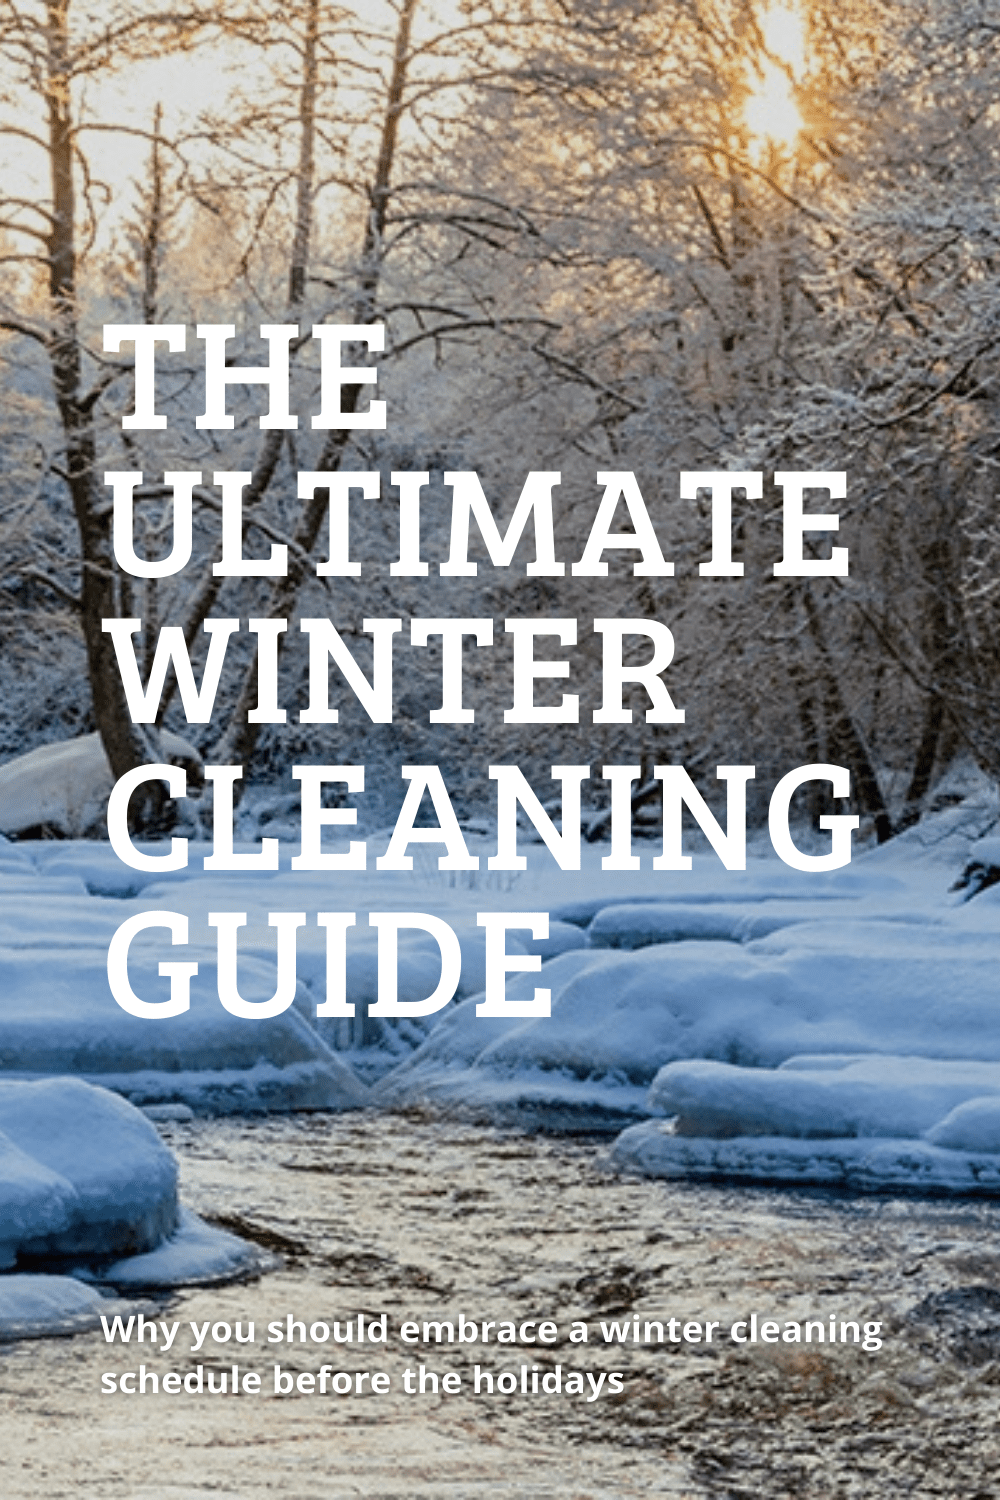 The Ultimate Winter Cleaning Guide